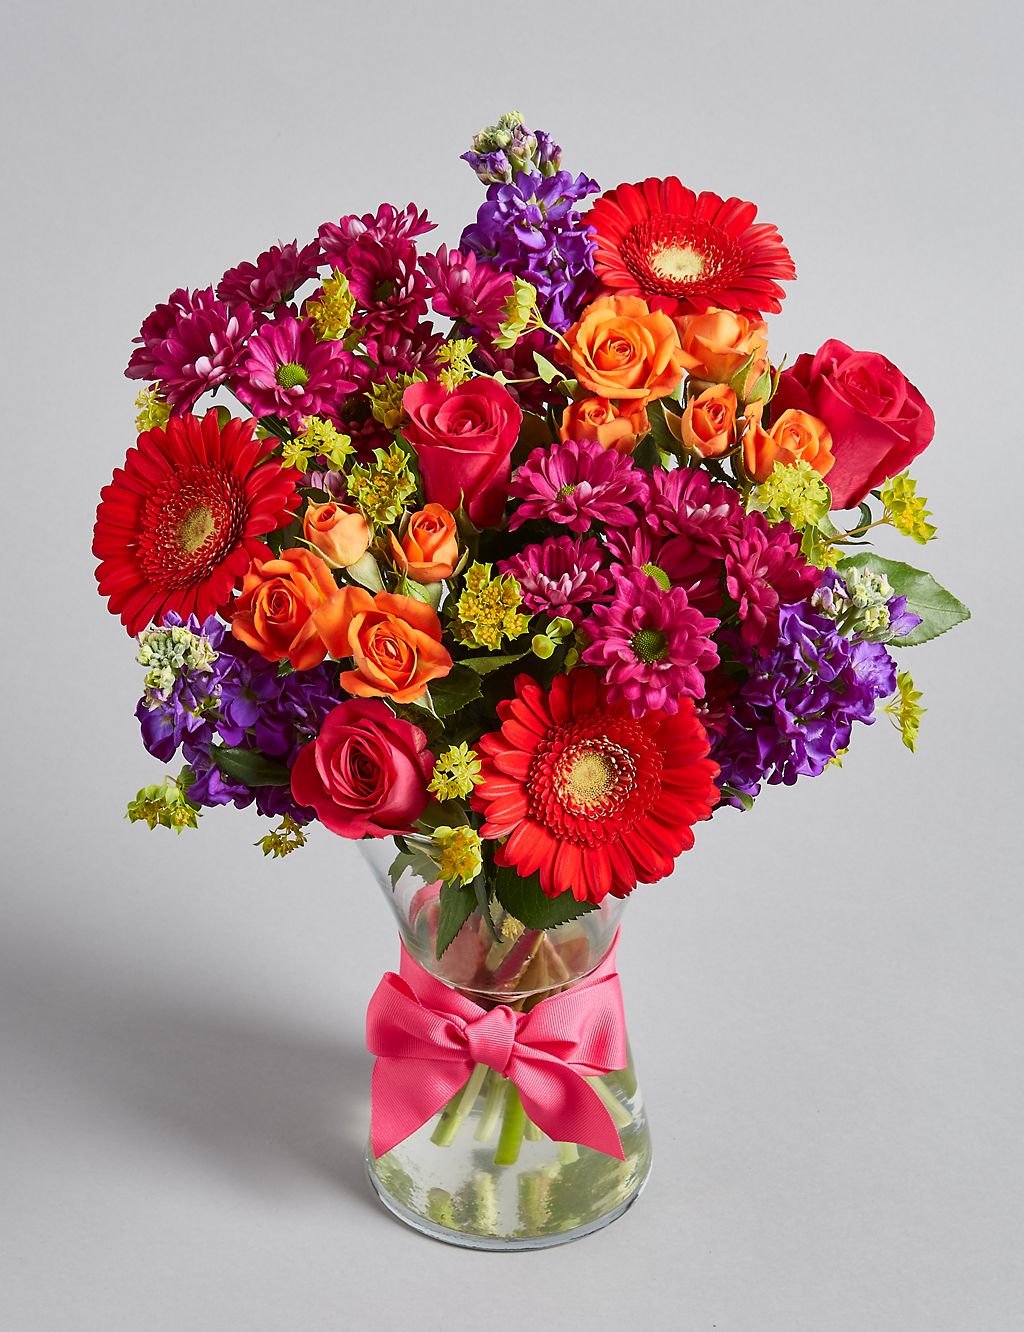 Summer Stocks & Rose Bouquet with Vase 3 of 5